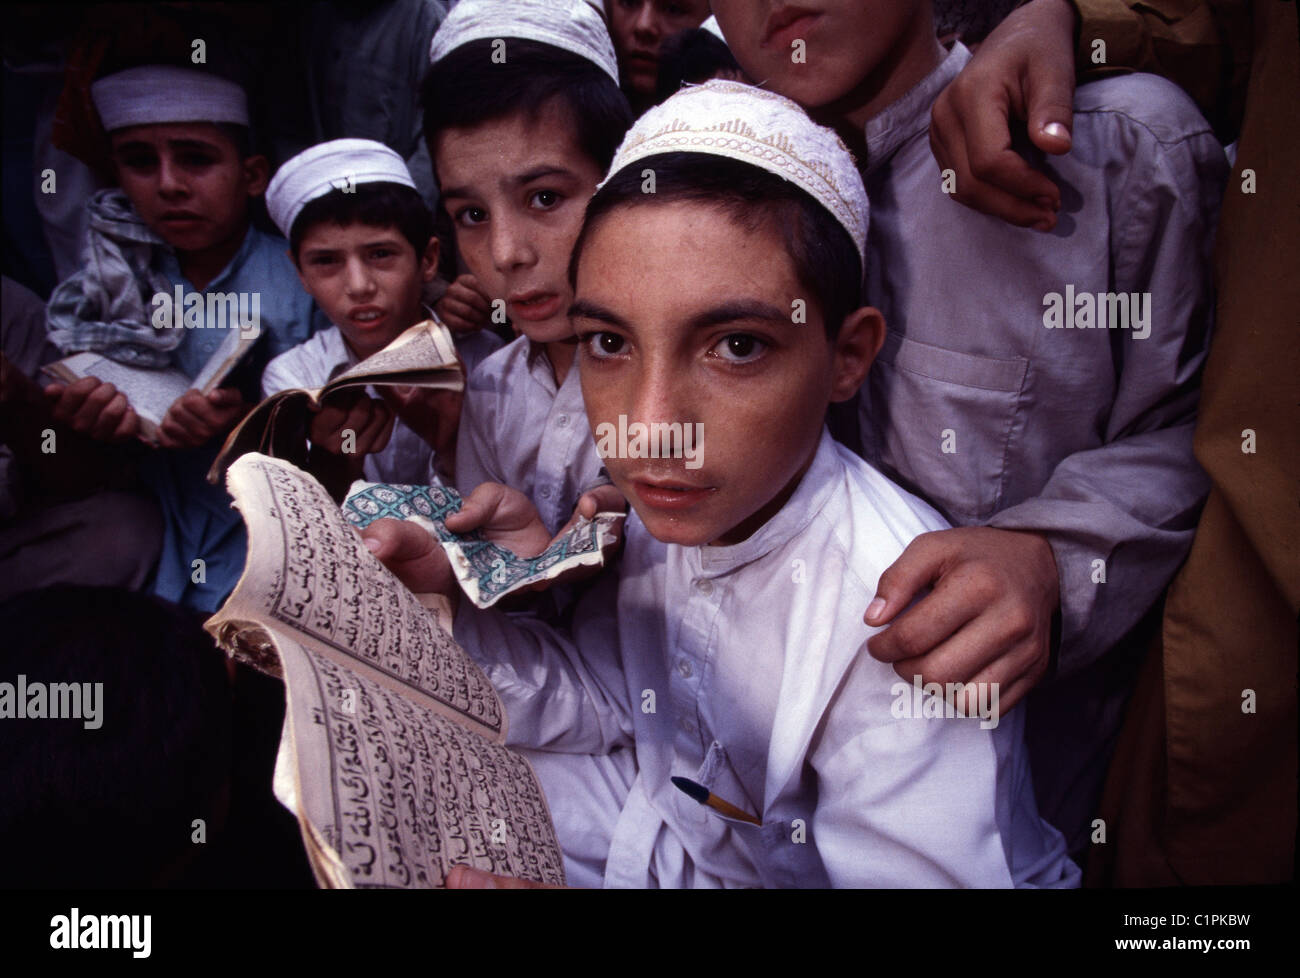 Young Muslim boys recite verses in Arabic from the Quran at a Peshawar, Pakistan madrassa, or religious school. Stock Photo